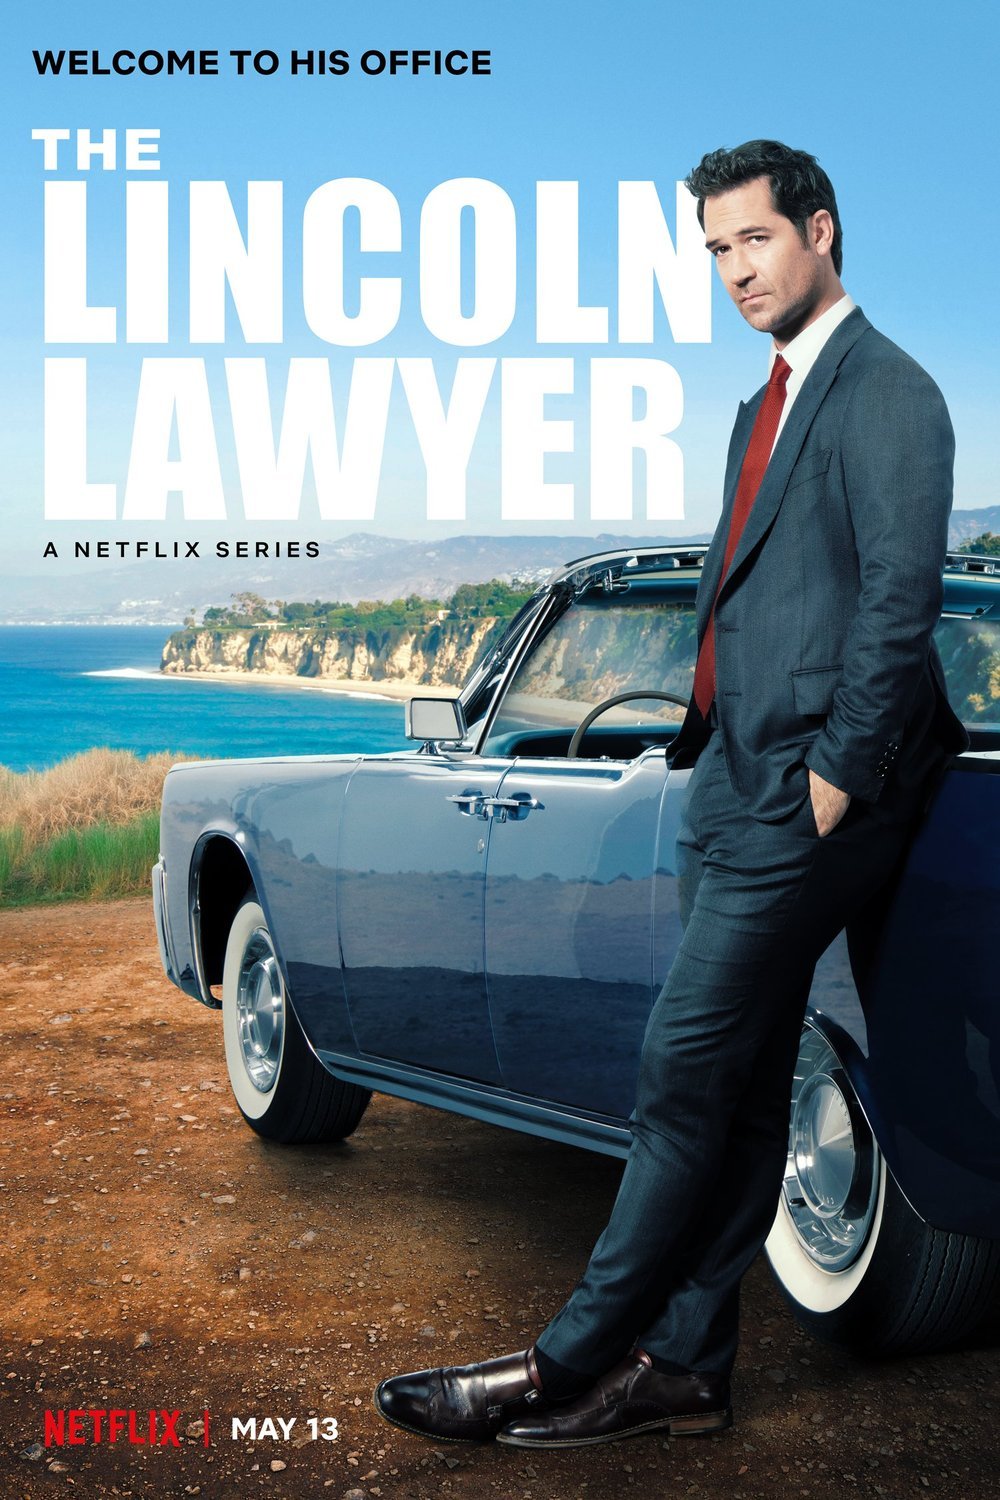 Poster of the movie The Lincoln Lawyer